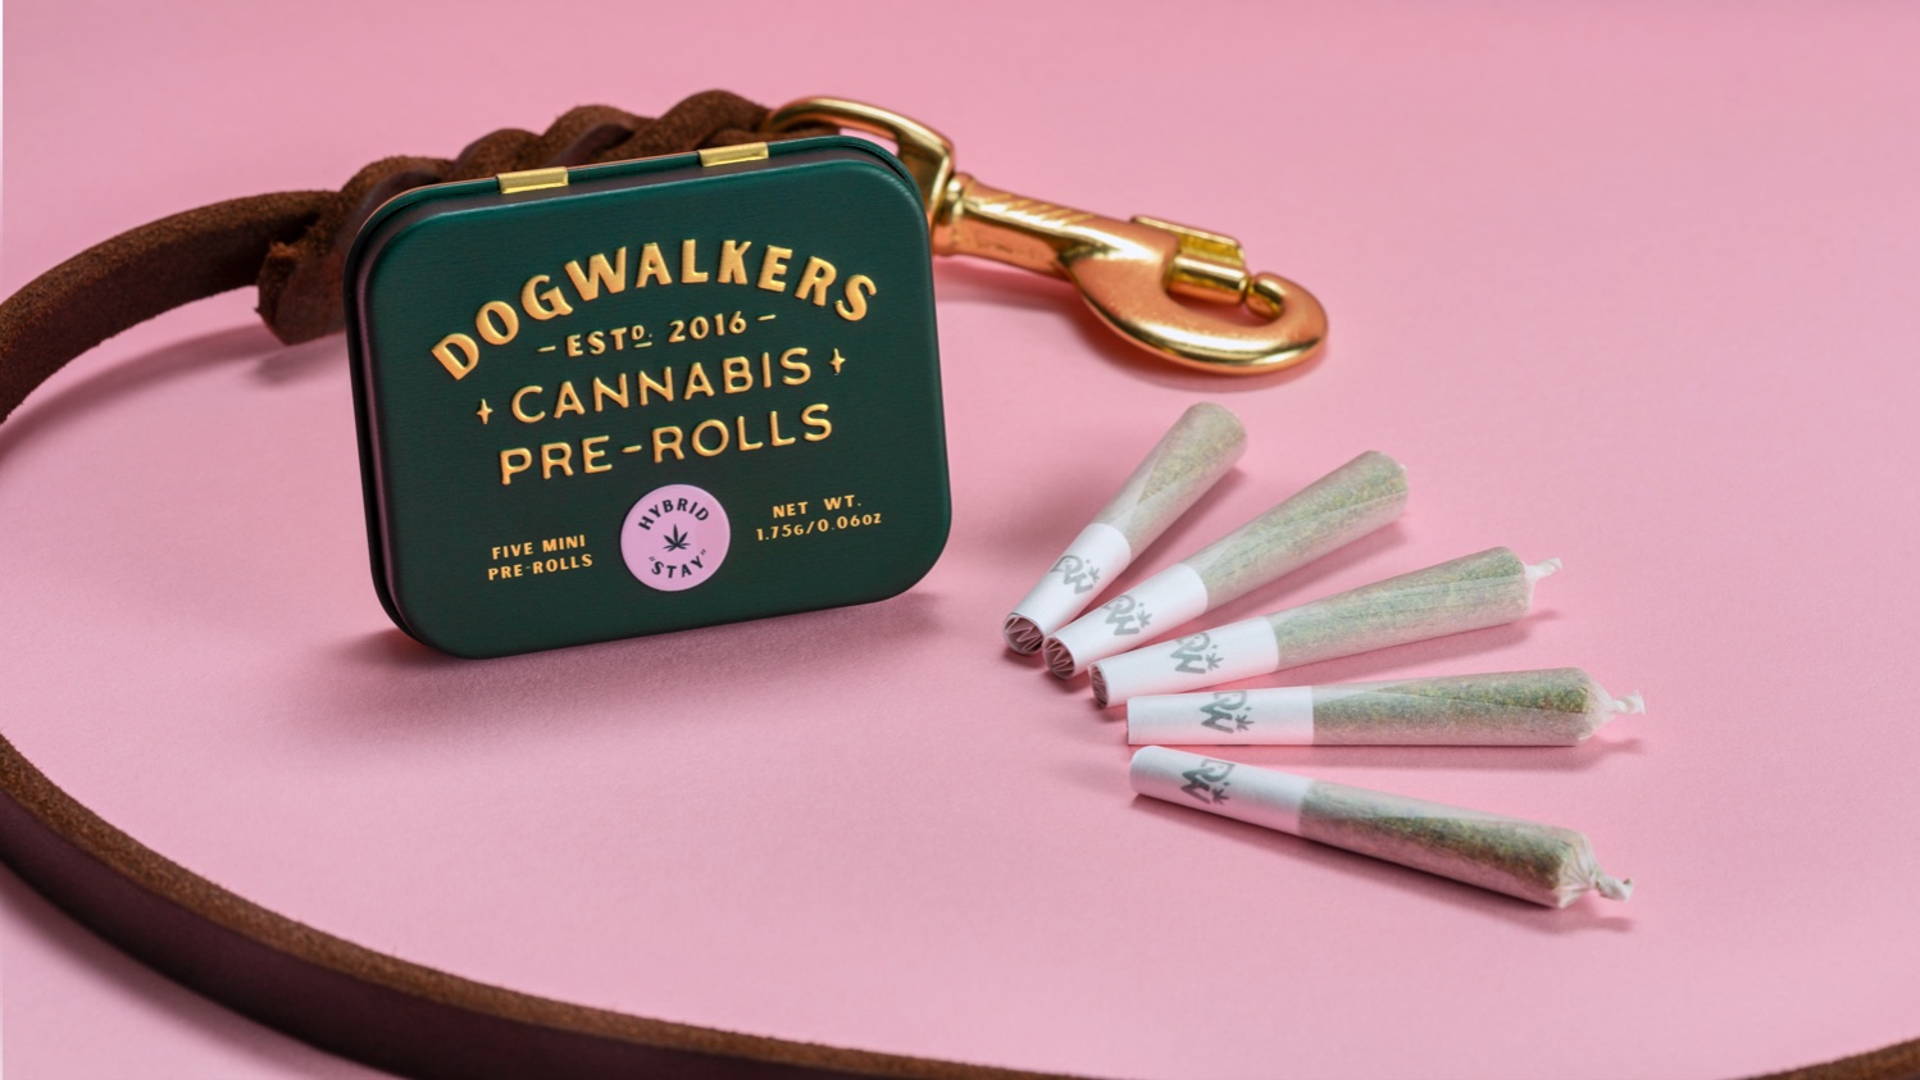 Featured image for Dogwalkers Cannabis Pre-Rolls Are Inspired By Walks With Your Pup